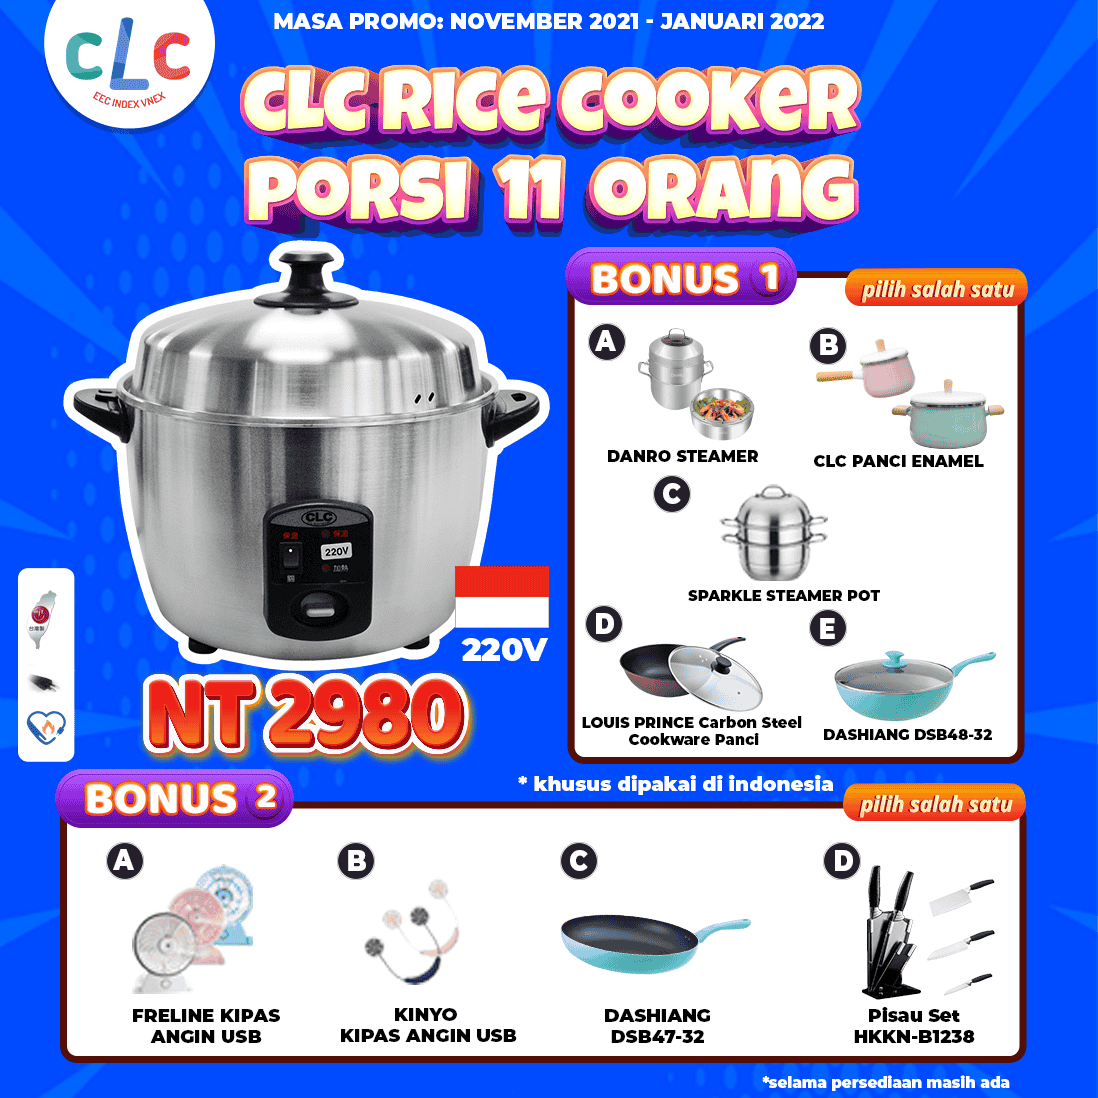 CLC Stainless Steel Rice Cooker 220V (SILVER)